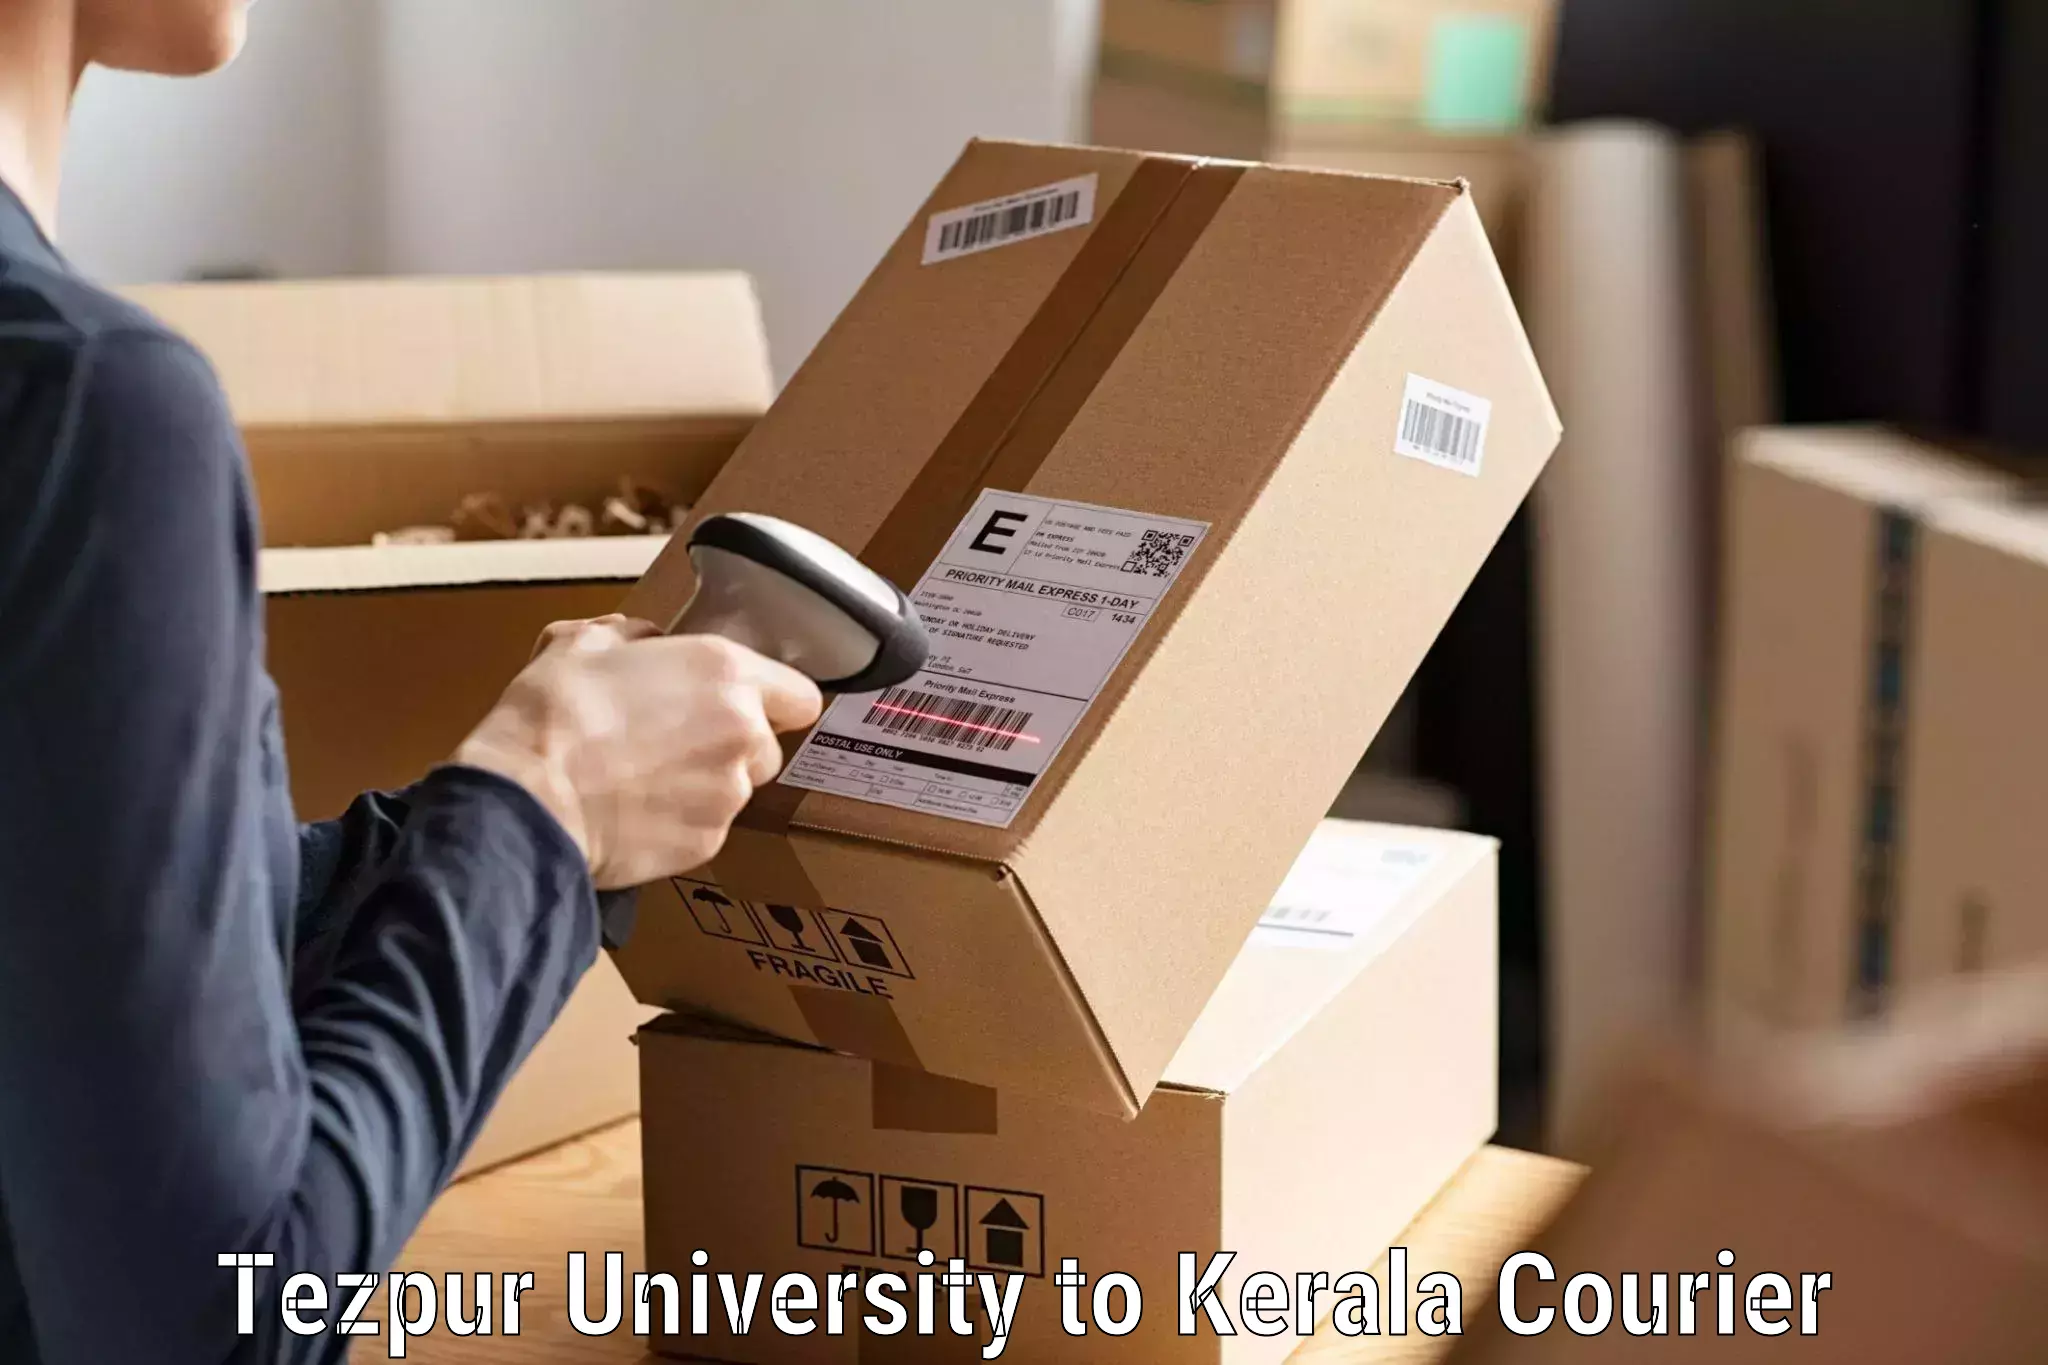 State-of-the-art courier technology in Tezpur University to Punalur